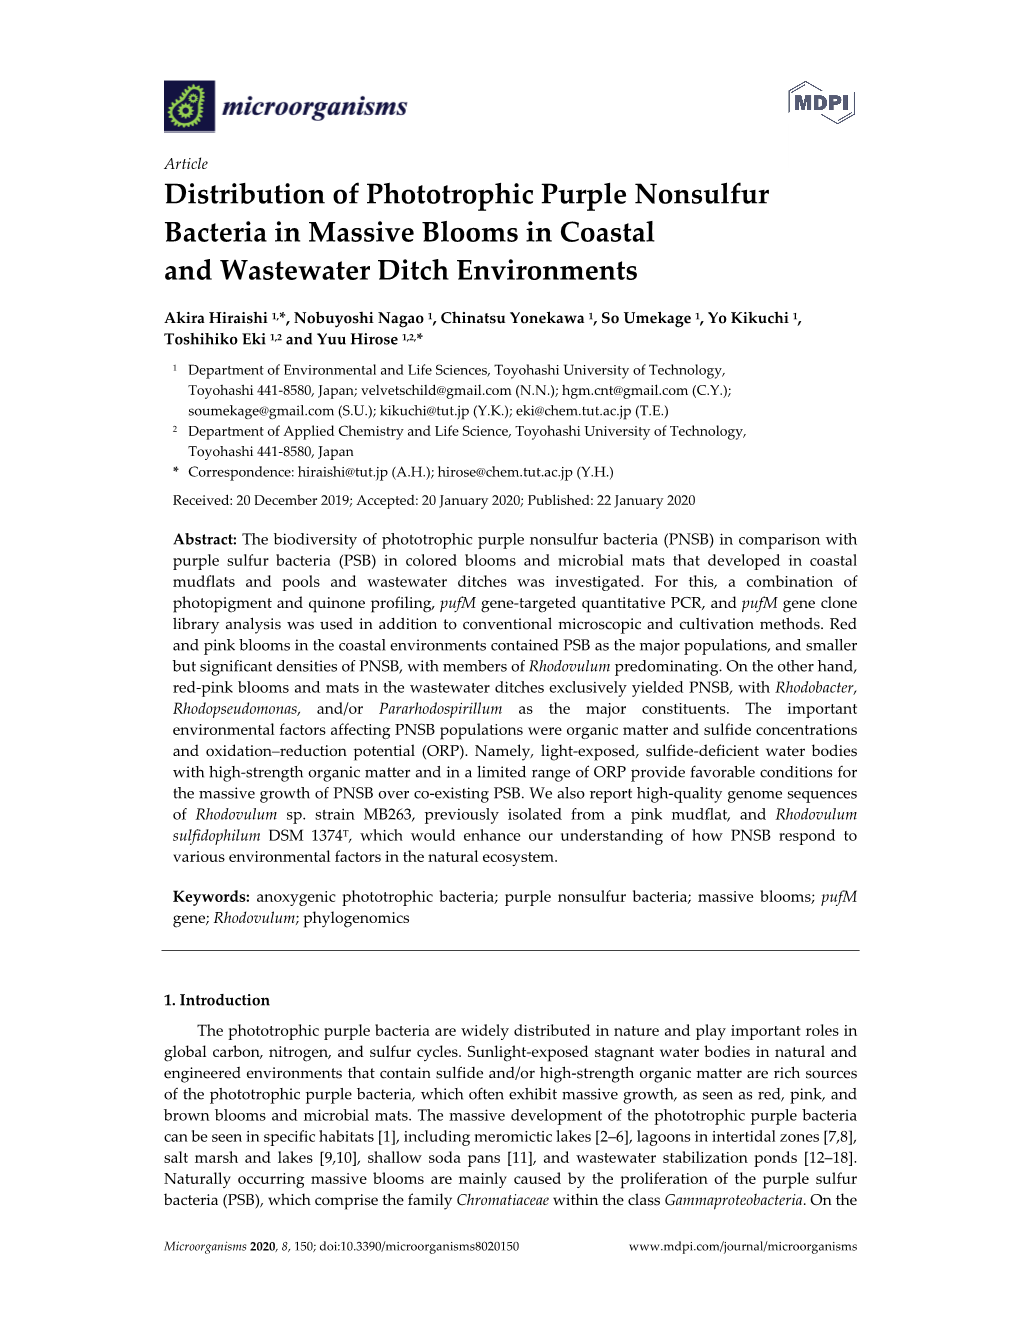 Distribution of Phototrophic Purple Nonsulfur Bacteria in Massive Blooms in Coastal and Wastewater Ditch Environments